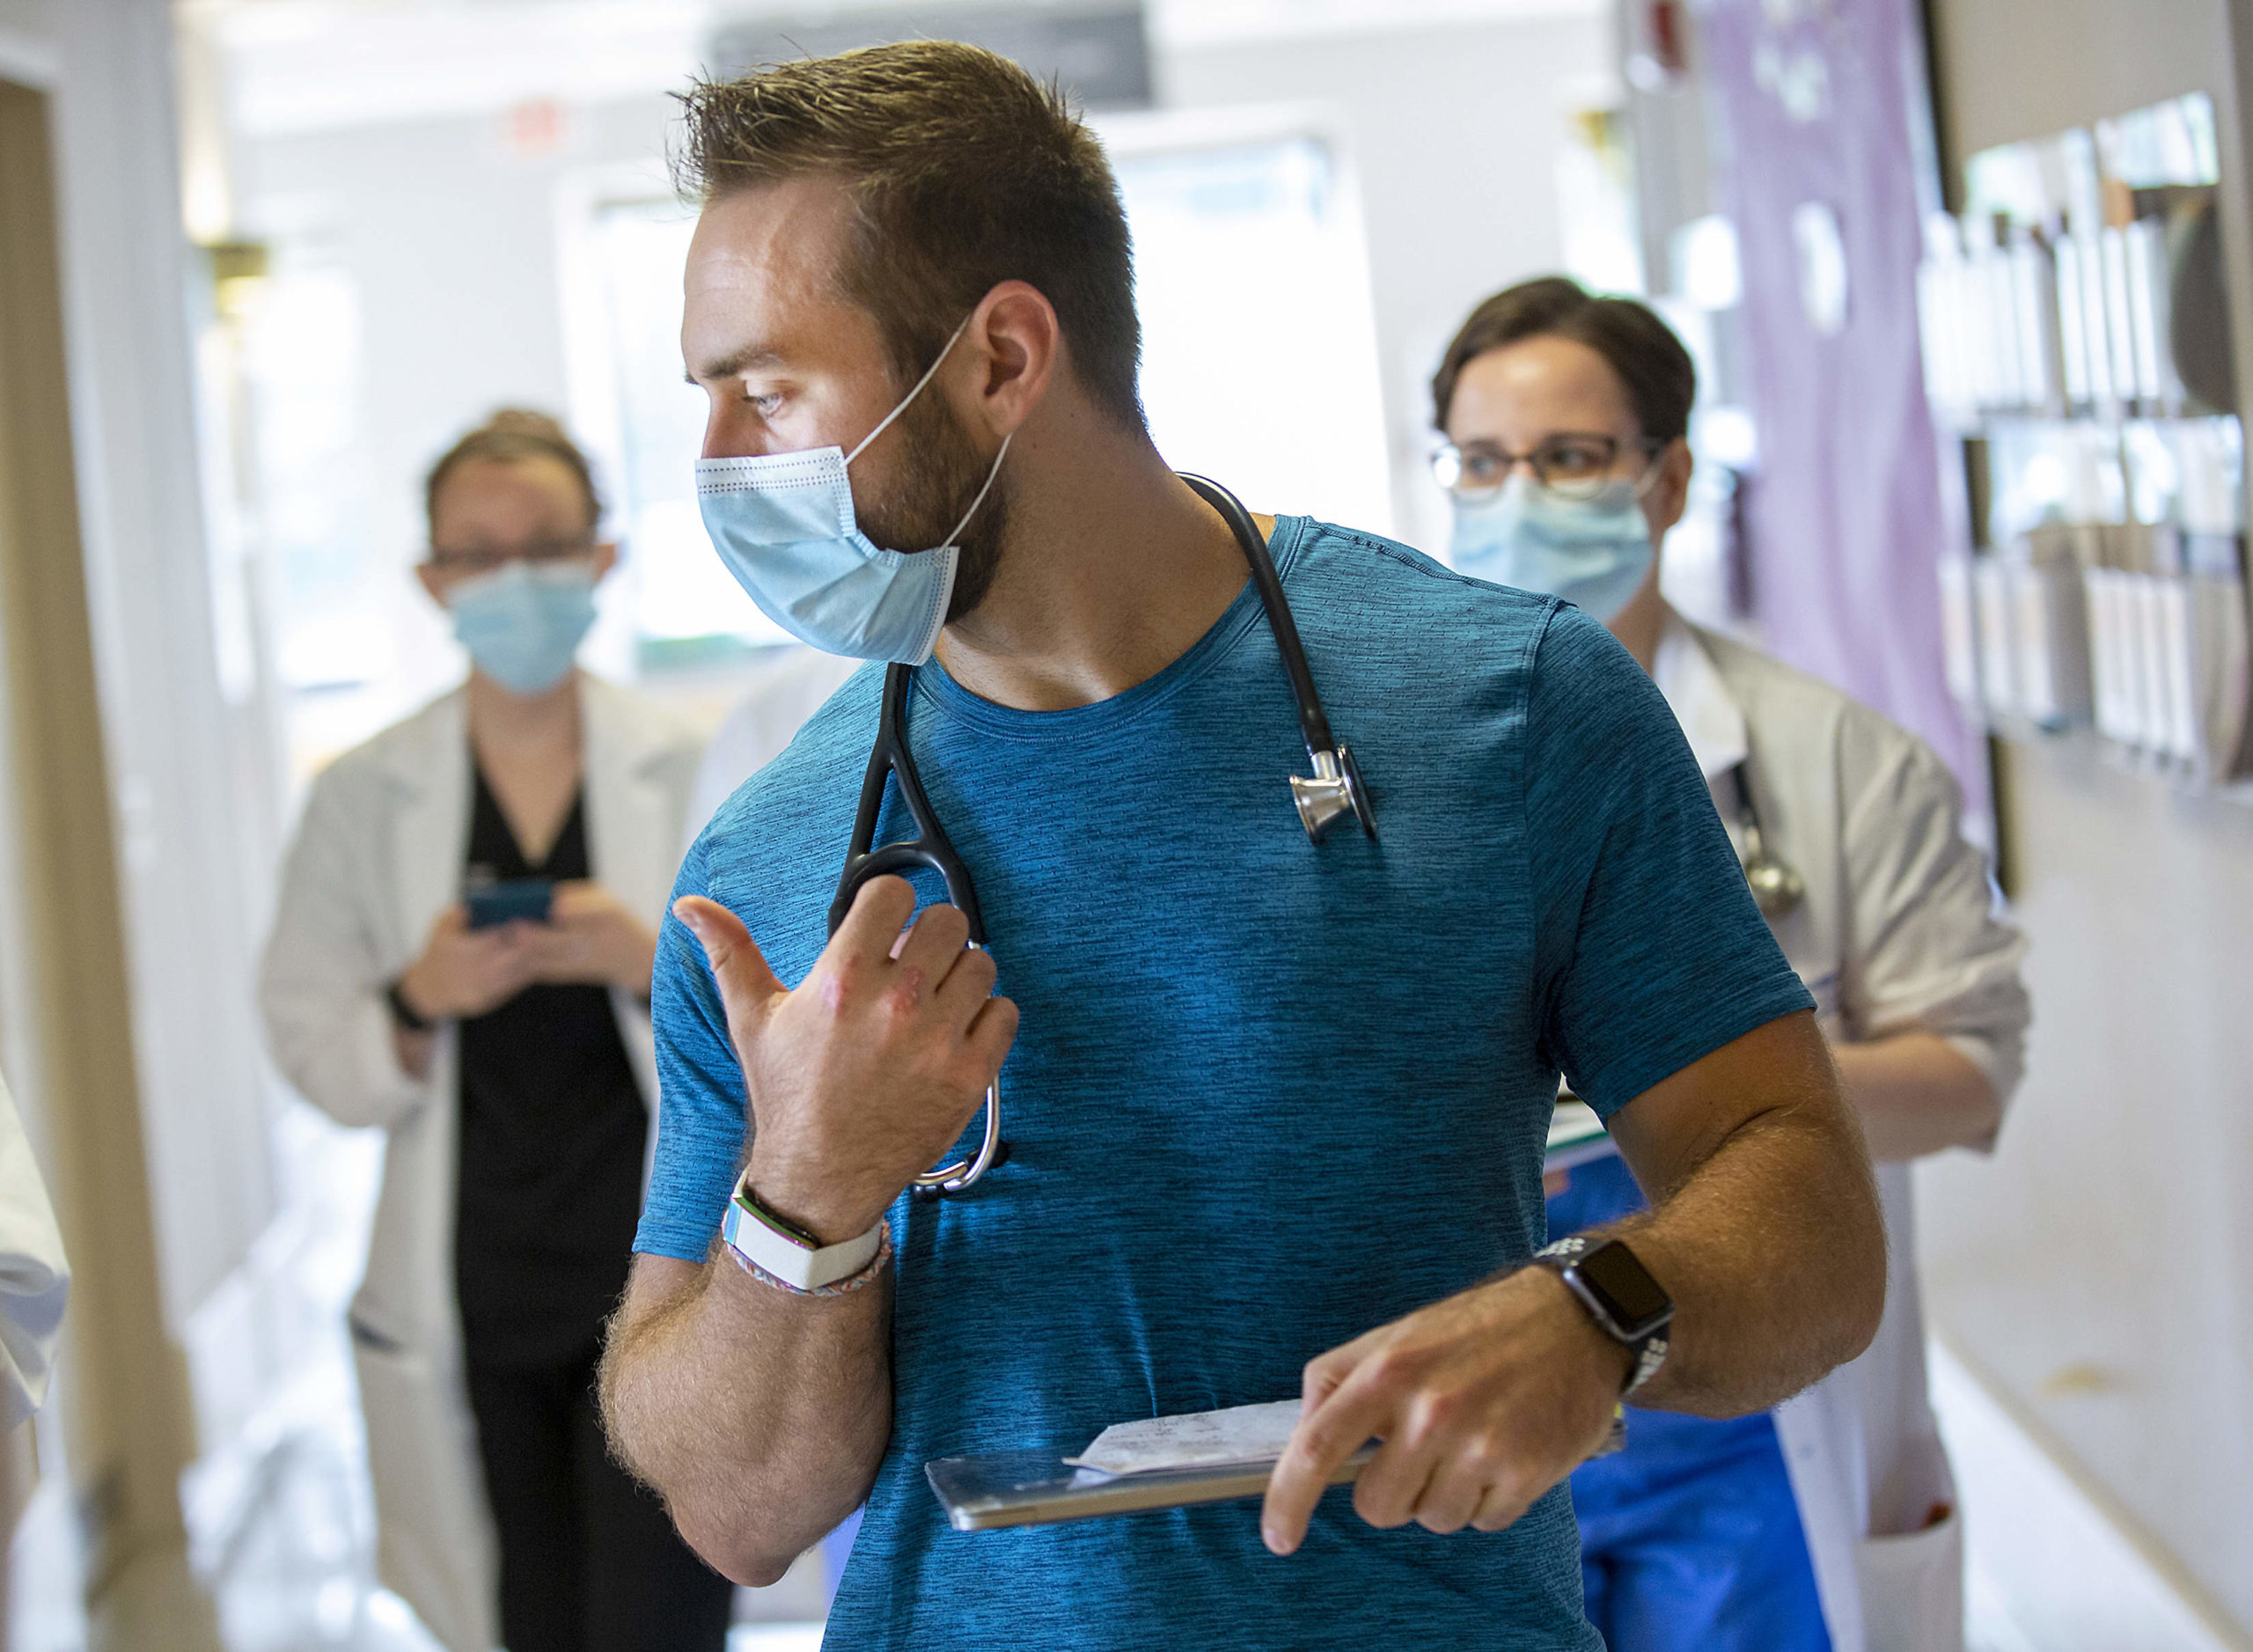 Dr. Alexander Hajduczok, a third-year internal medicine resident at Penn State Health Milton S. Hershey Medical Center, sports a wearable device manufactured by WHOOP on his right wrist. Two other physicians are behind him, walking down a hallway.